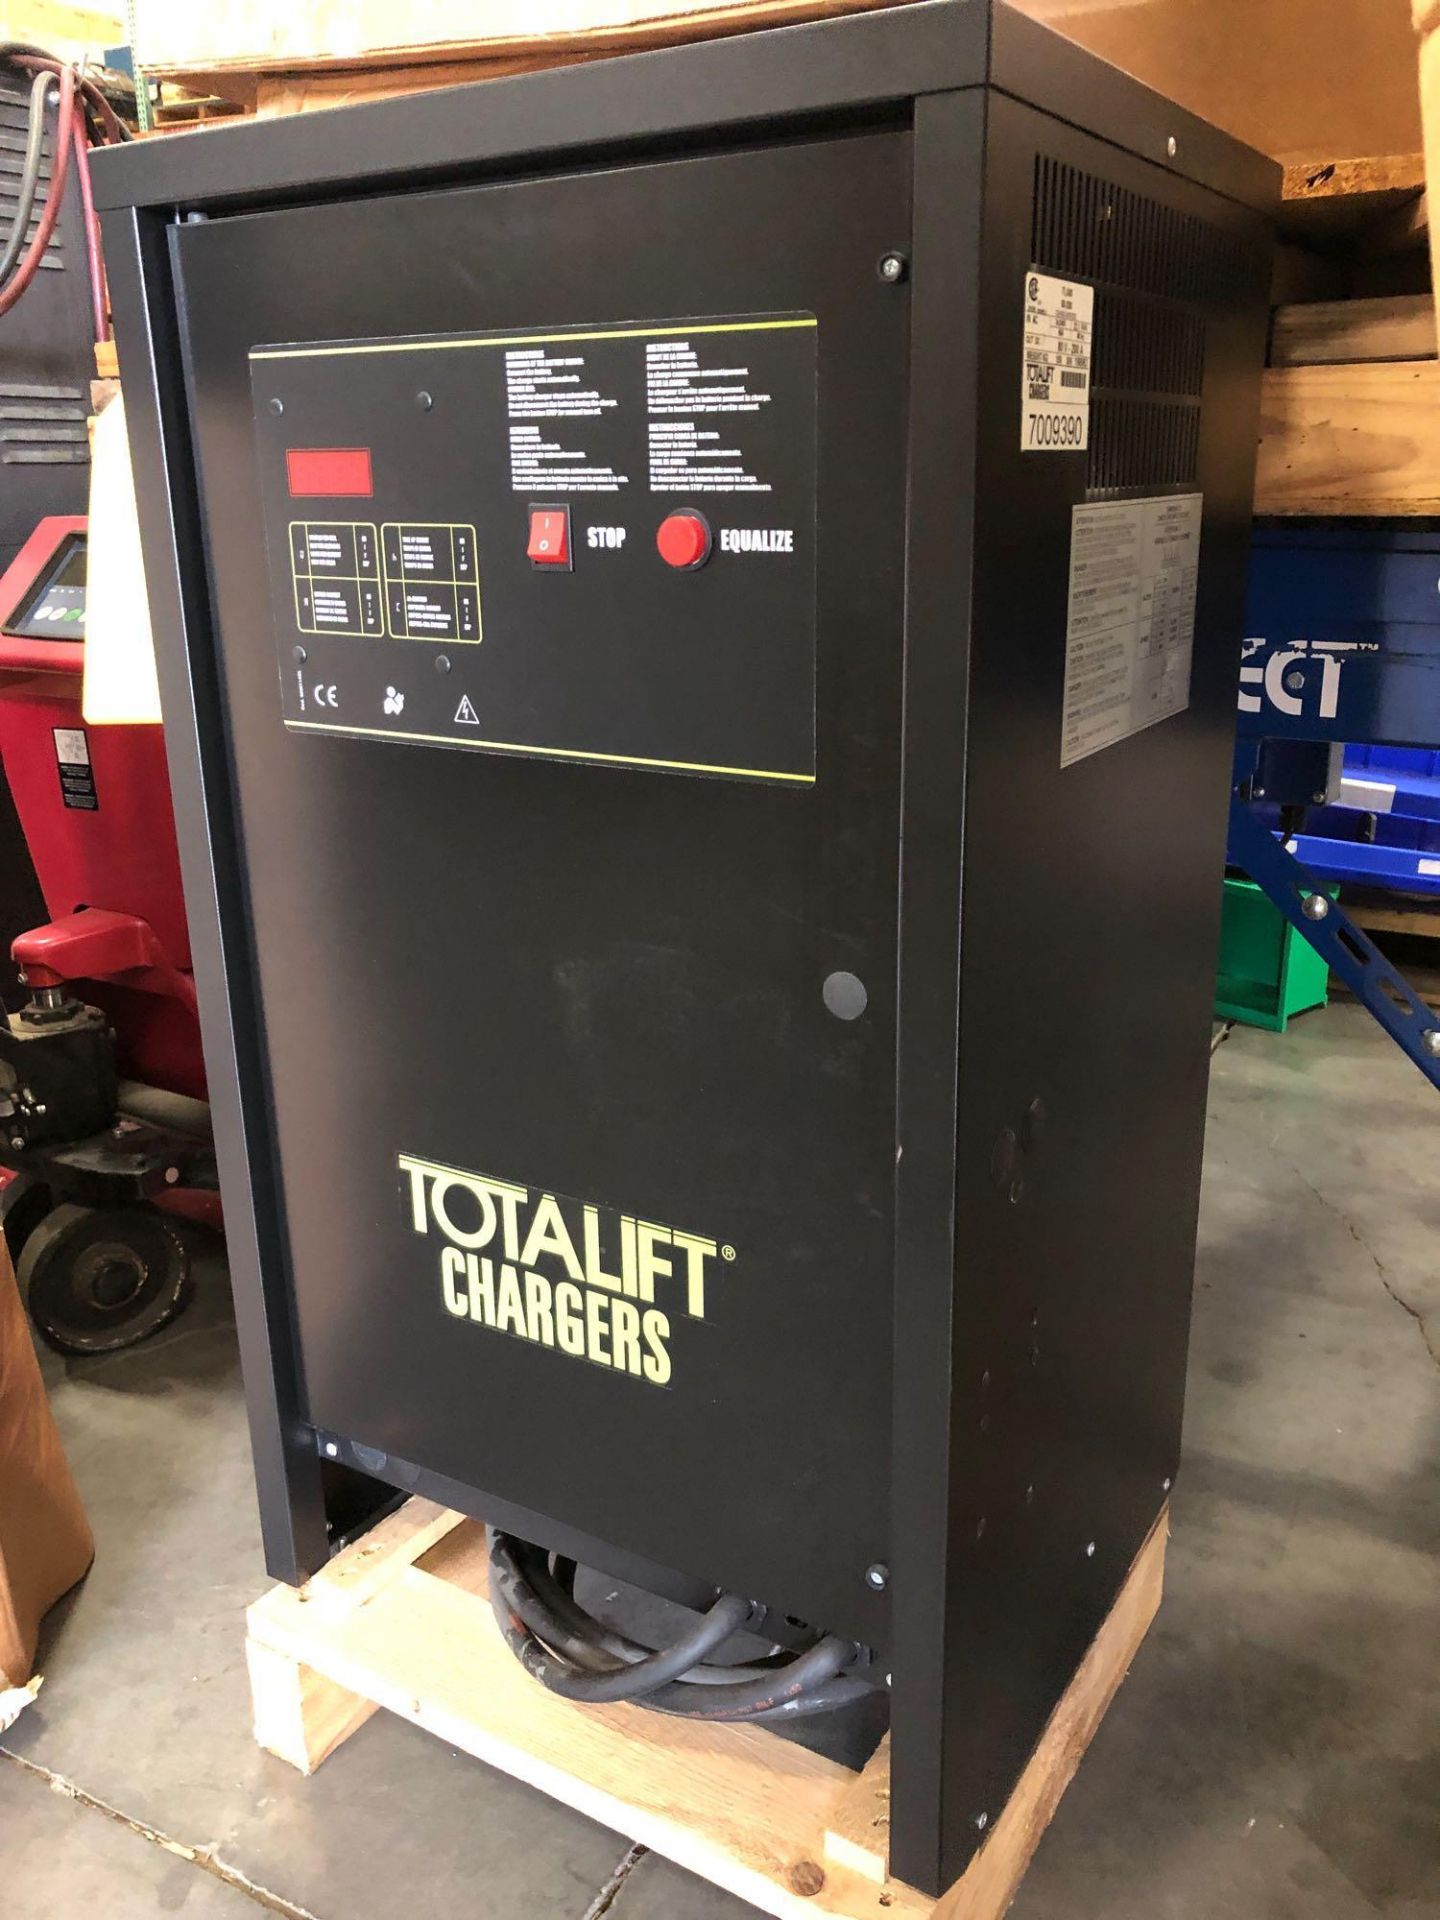 NEW TOTALIFT 80V BATTERY CHARGER - Image 2 of 3